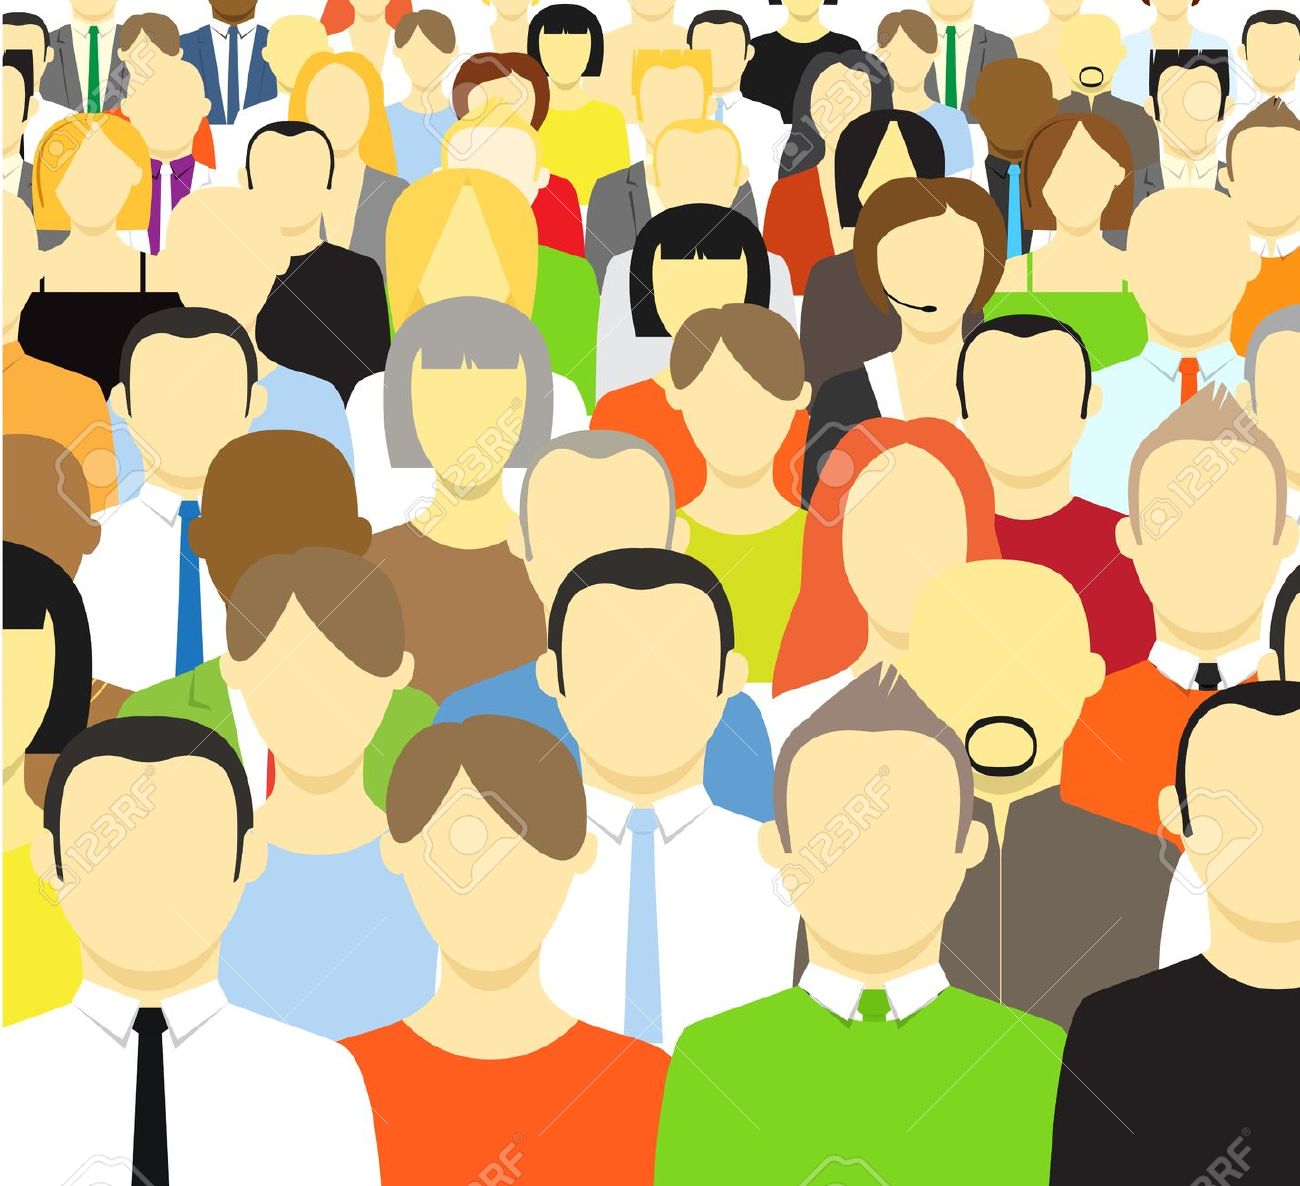 Clipart Info - Crowd Of People Clipart